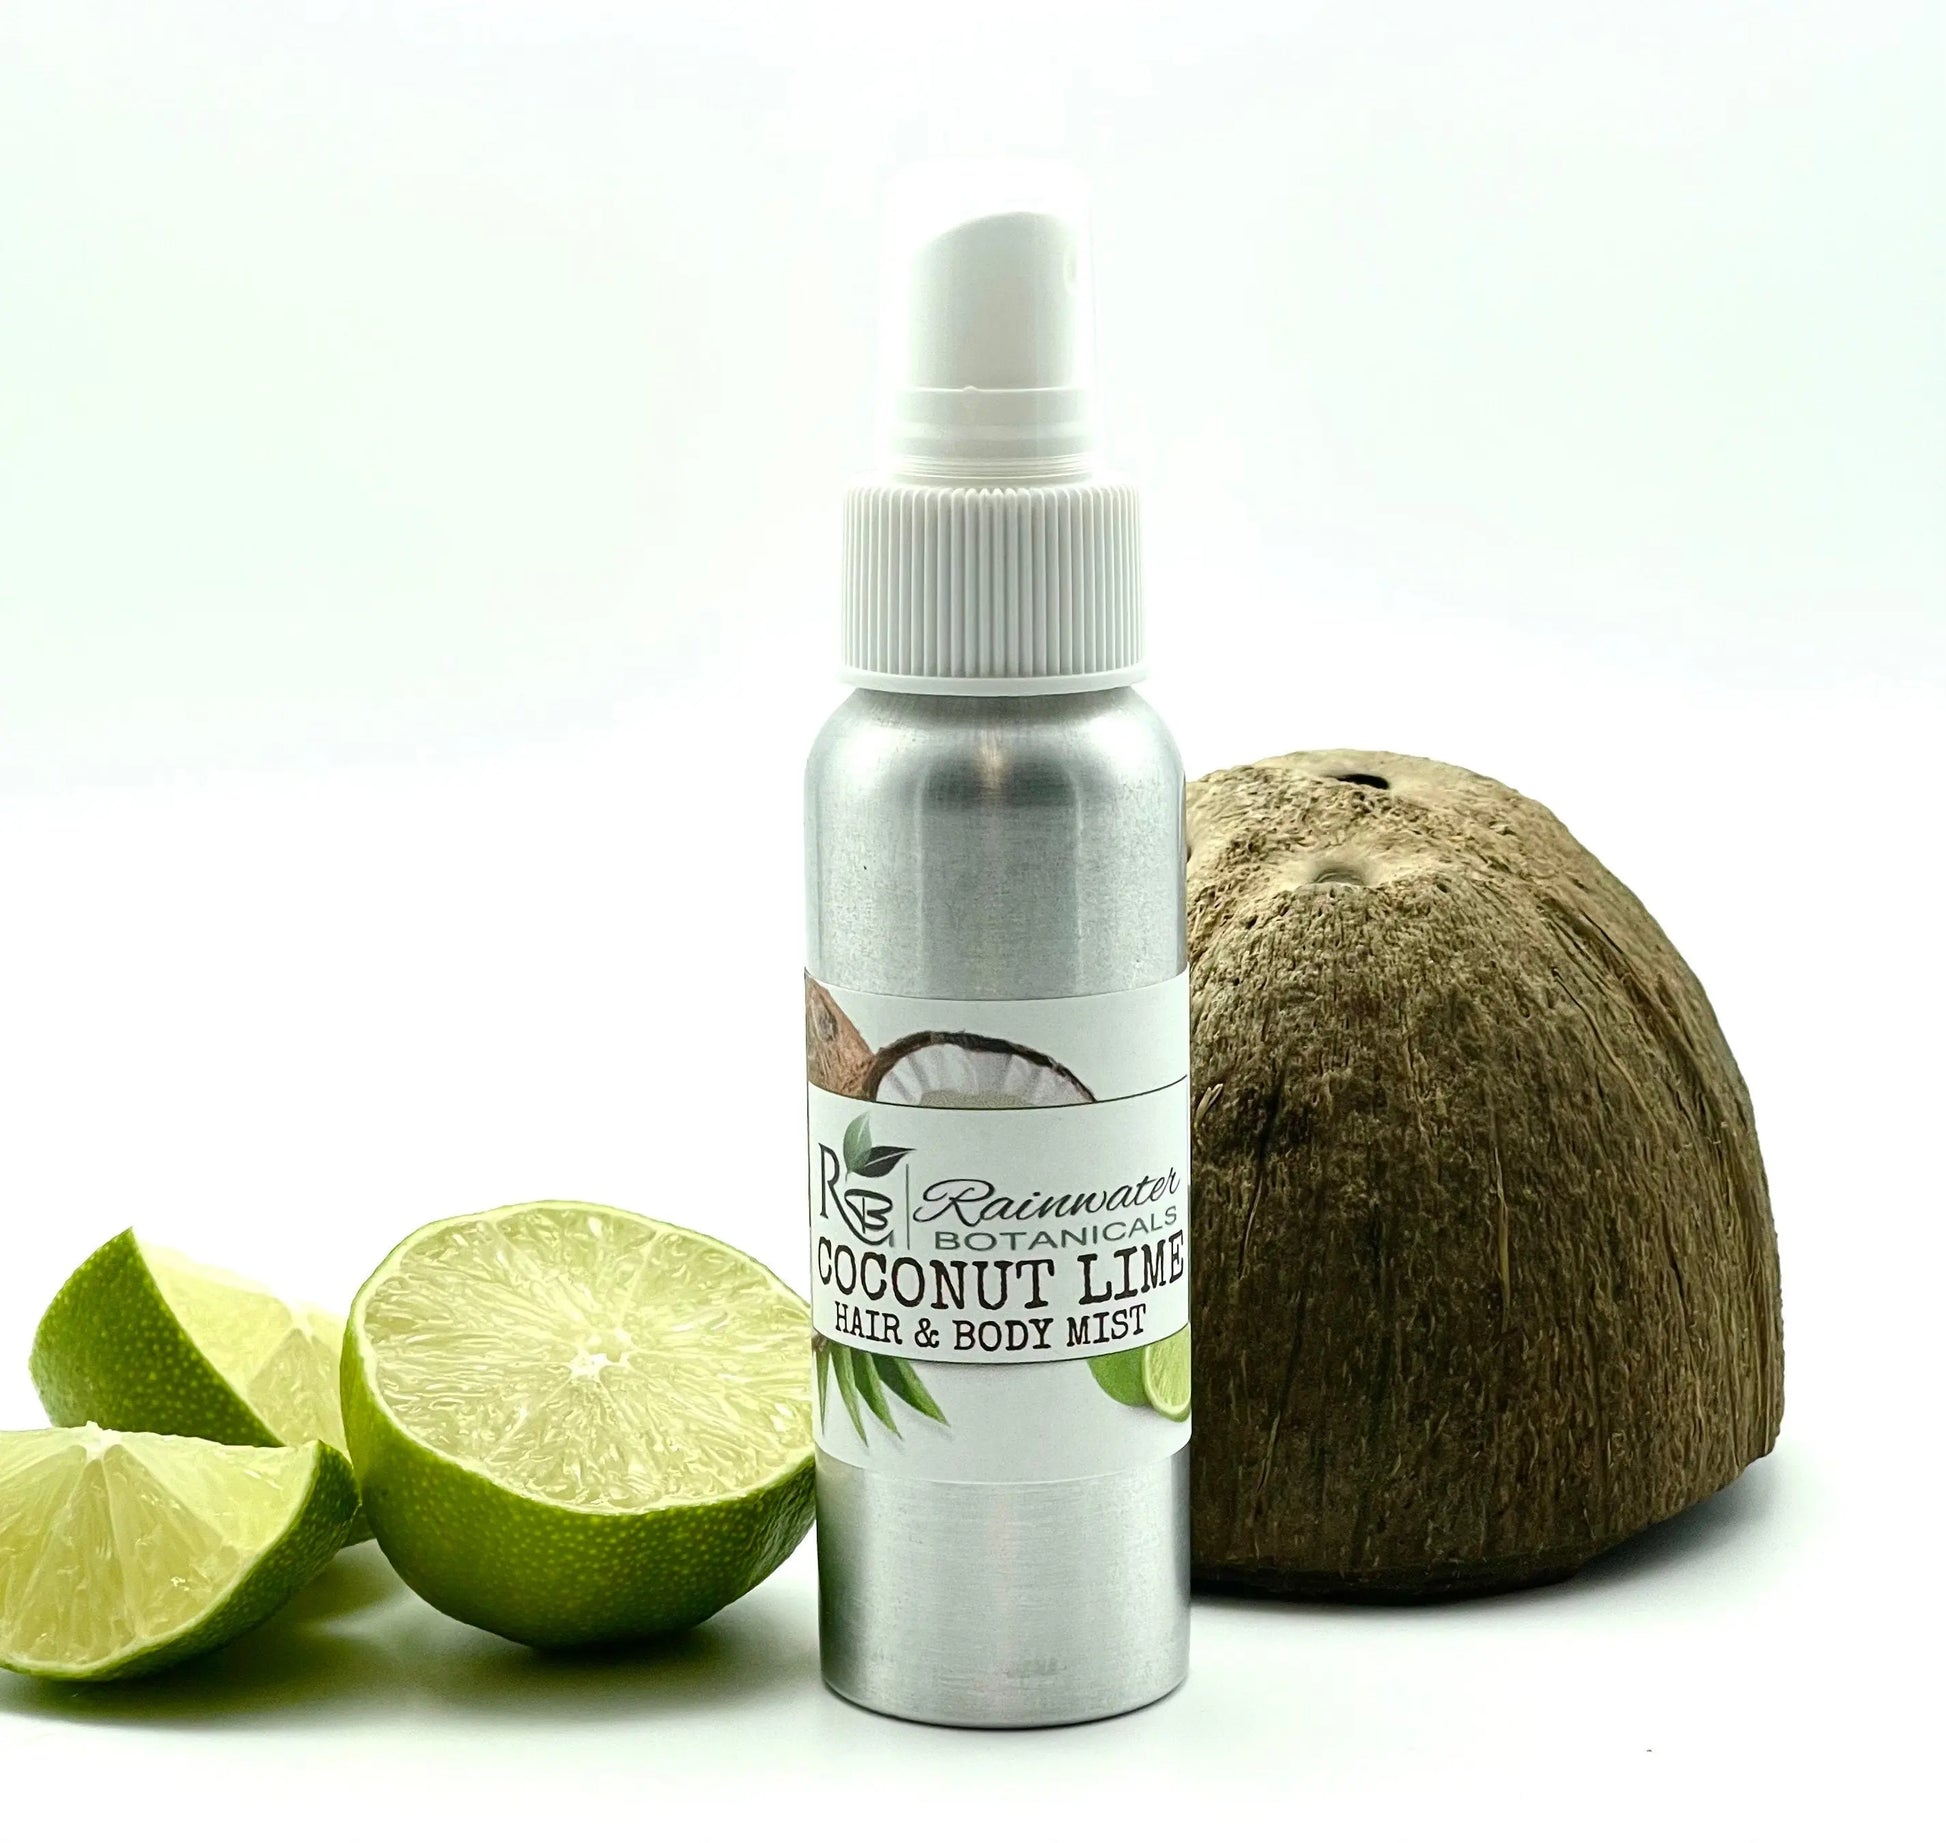 Coconut Lime Hair and Body Mist-Rainwater Botanicals